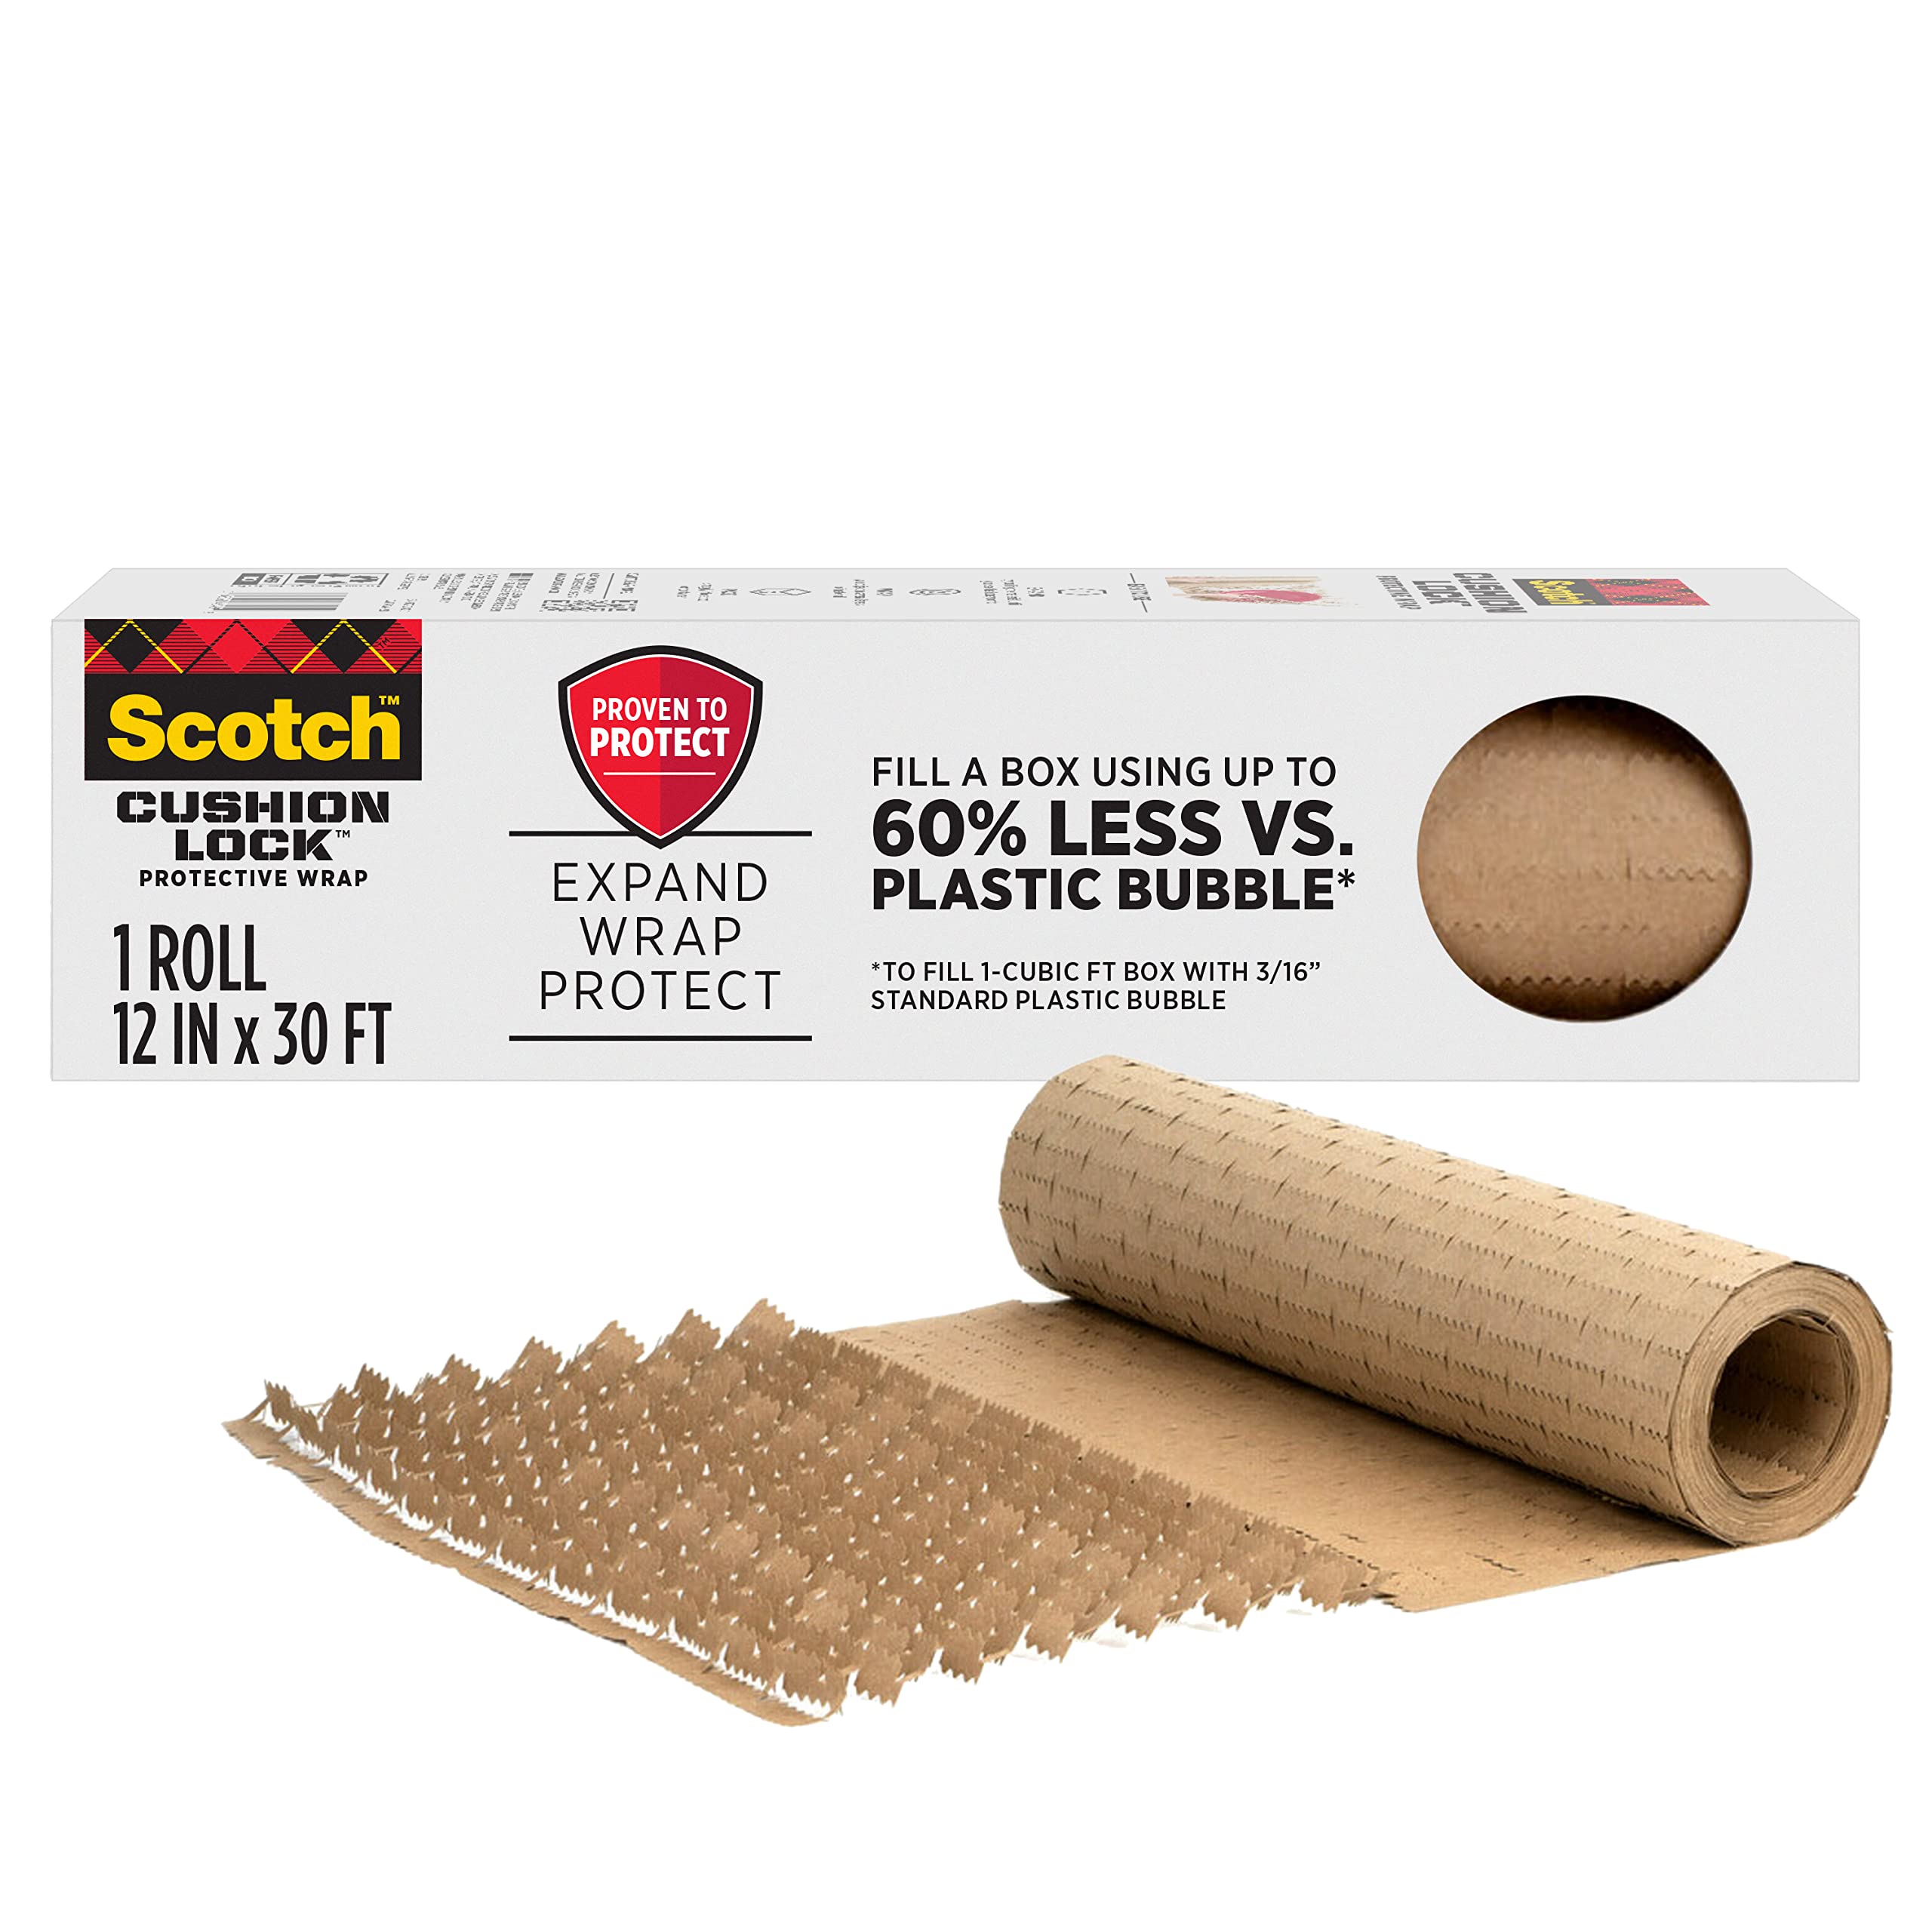 Scotch Cushion Lock Protective Wrap, 12 in x 30 ft, Sus...